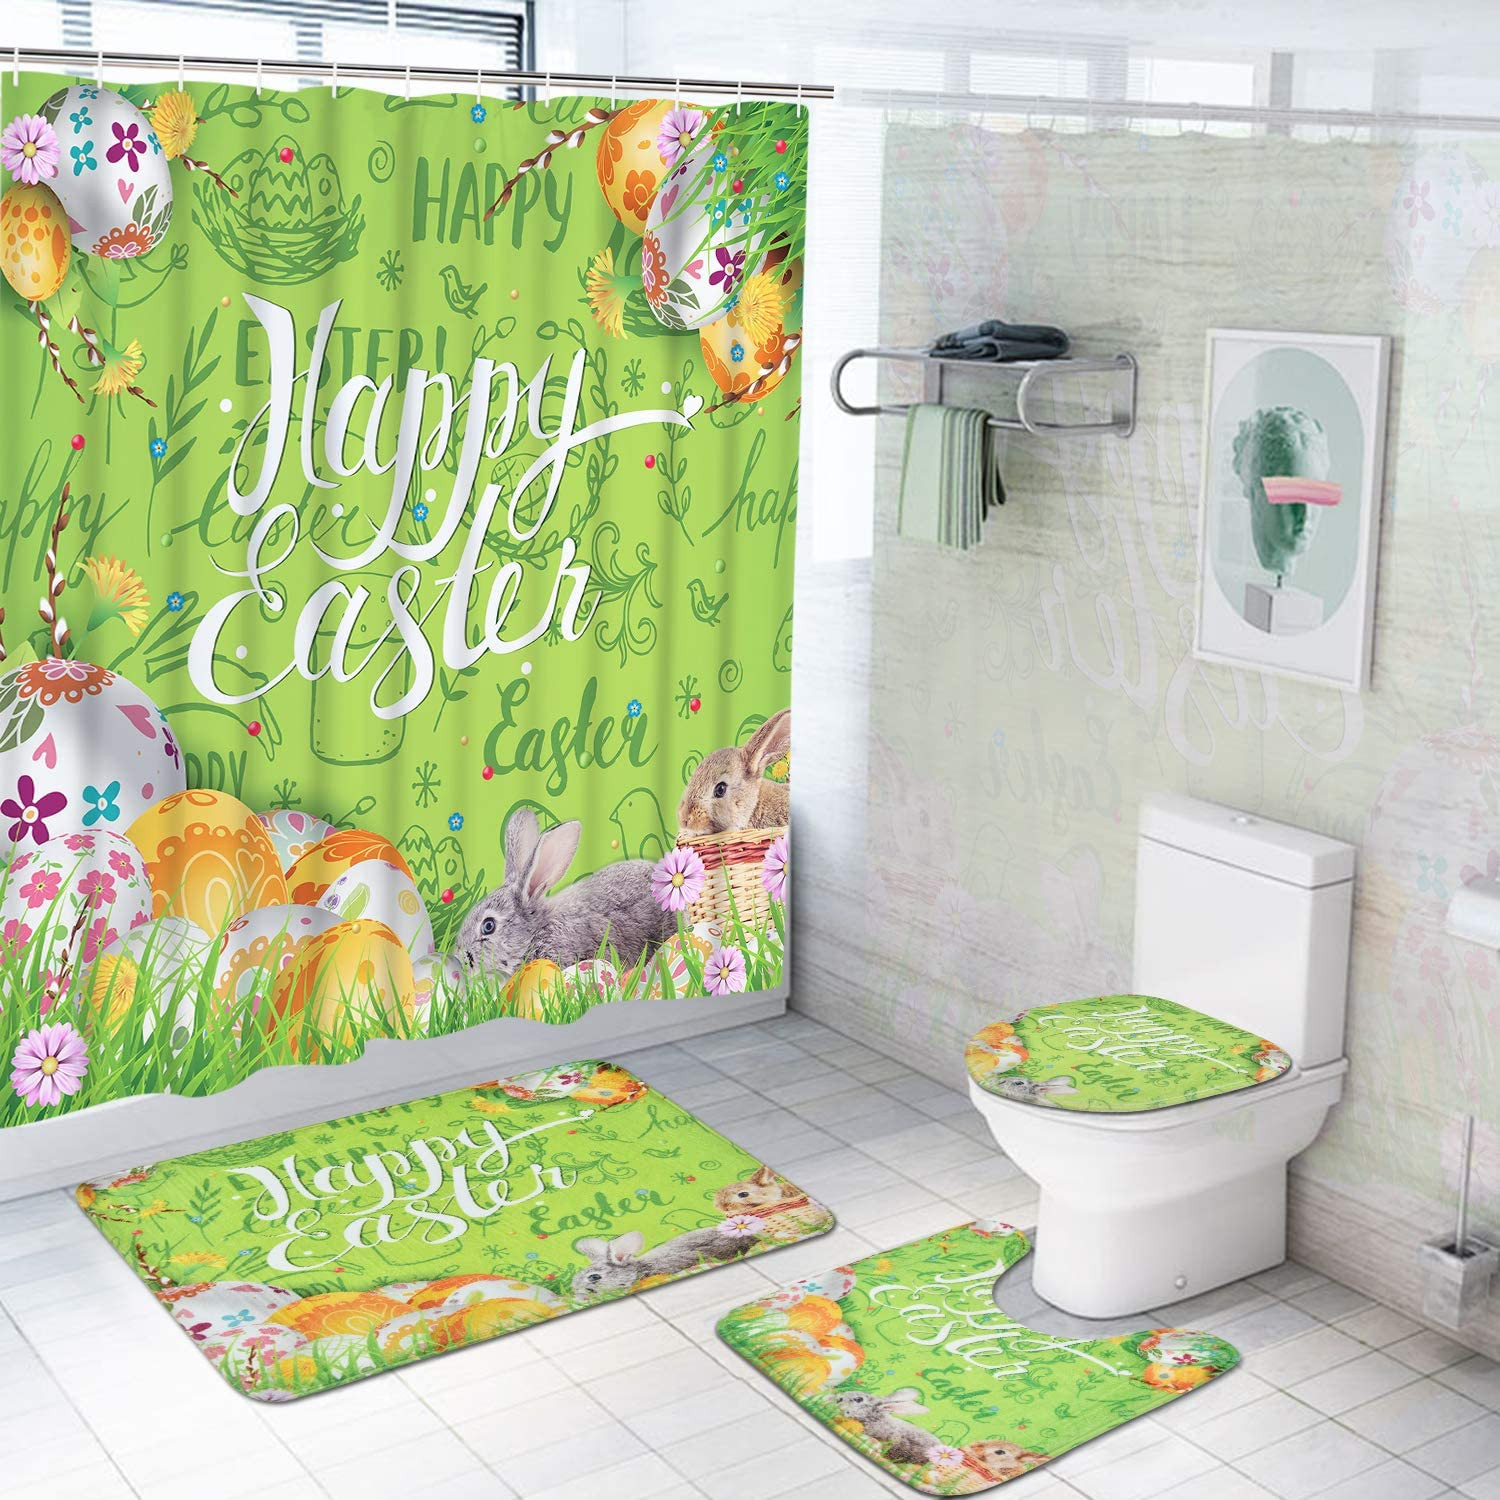 Easter Bathroom Decor
 Amazon Pknoclan 4 Piece Easter Day Shower Curtain